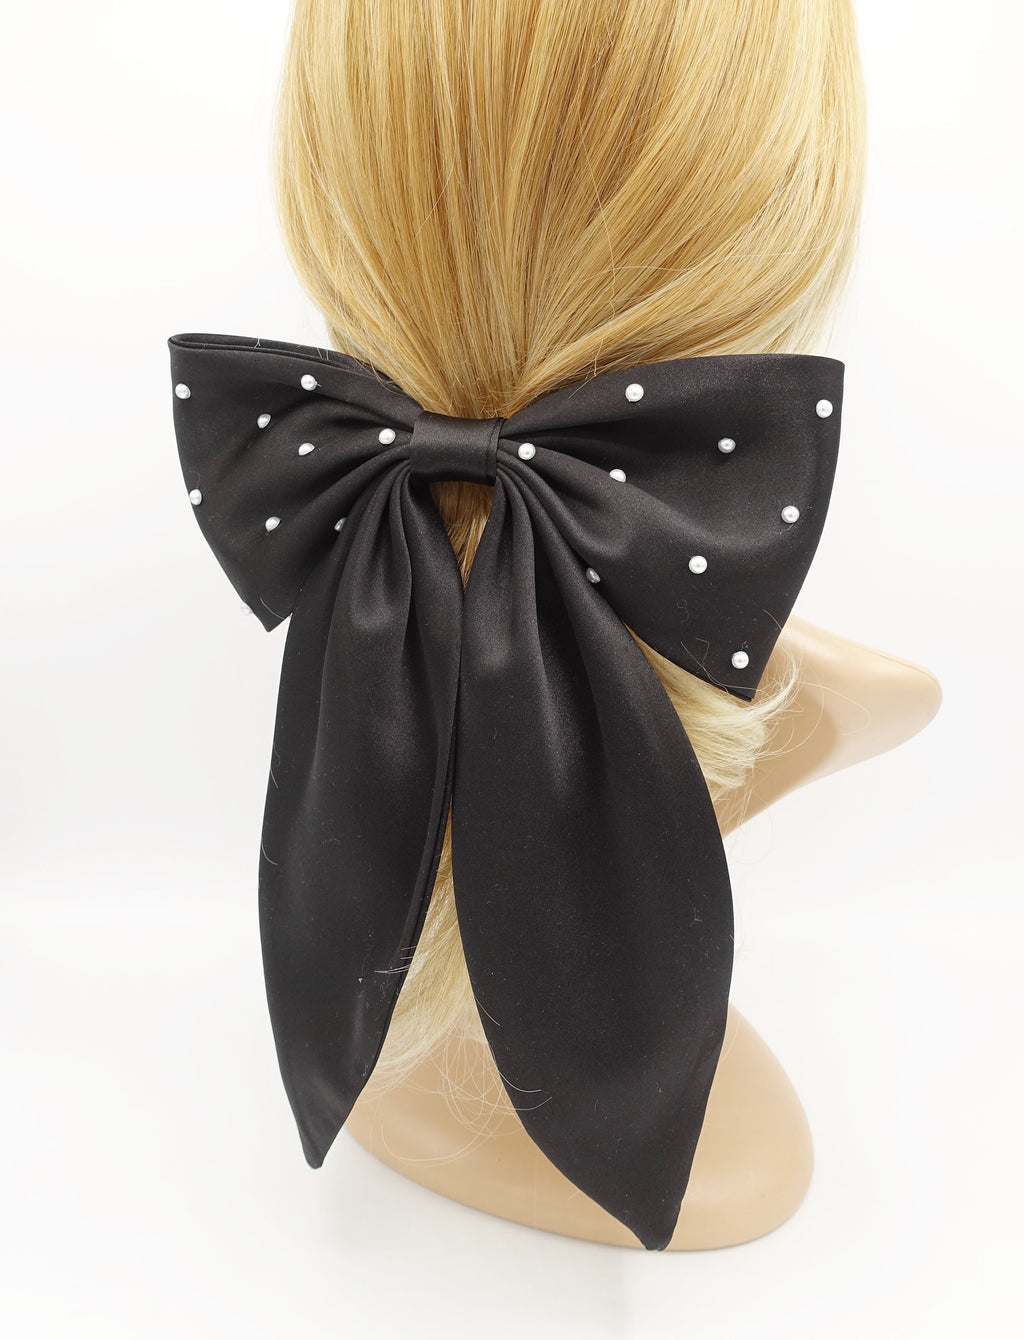 veryshine3 claw/banana/barrette Black pearl embellished satin hair bow big size large hair bow for women